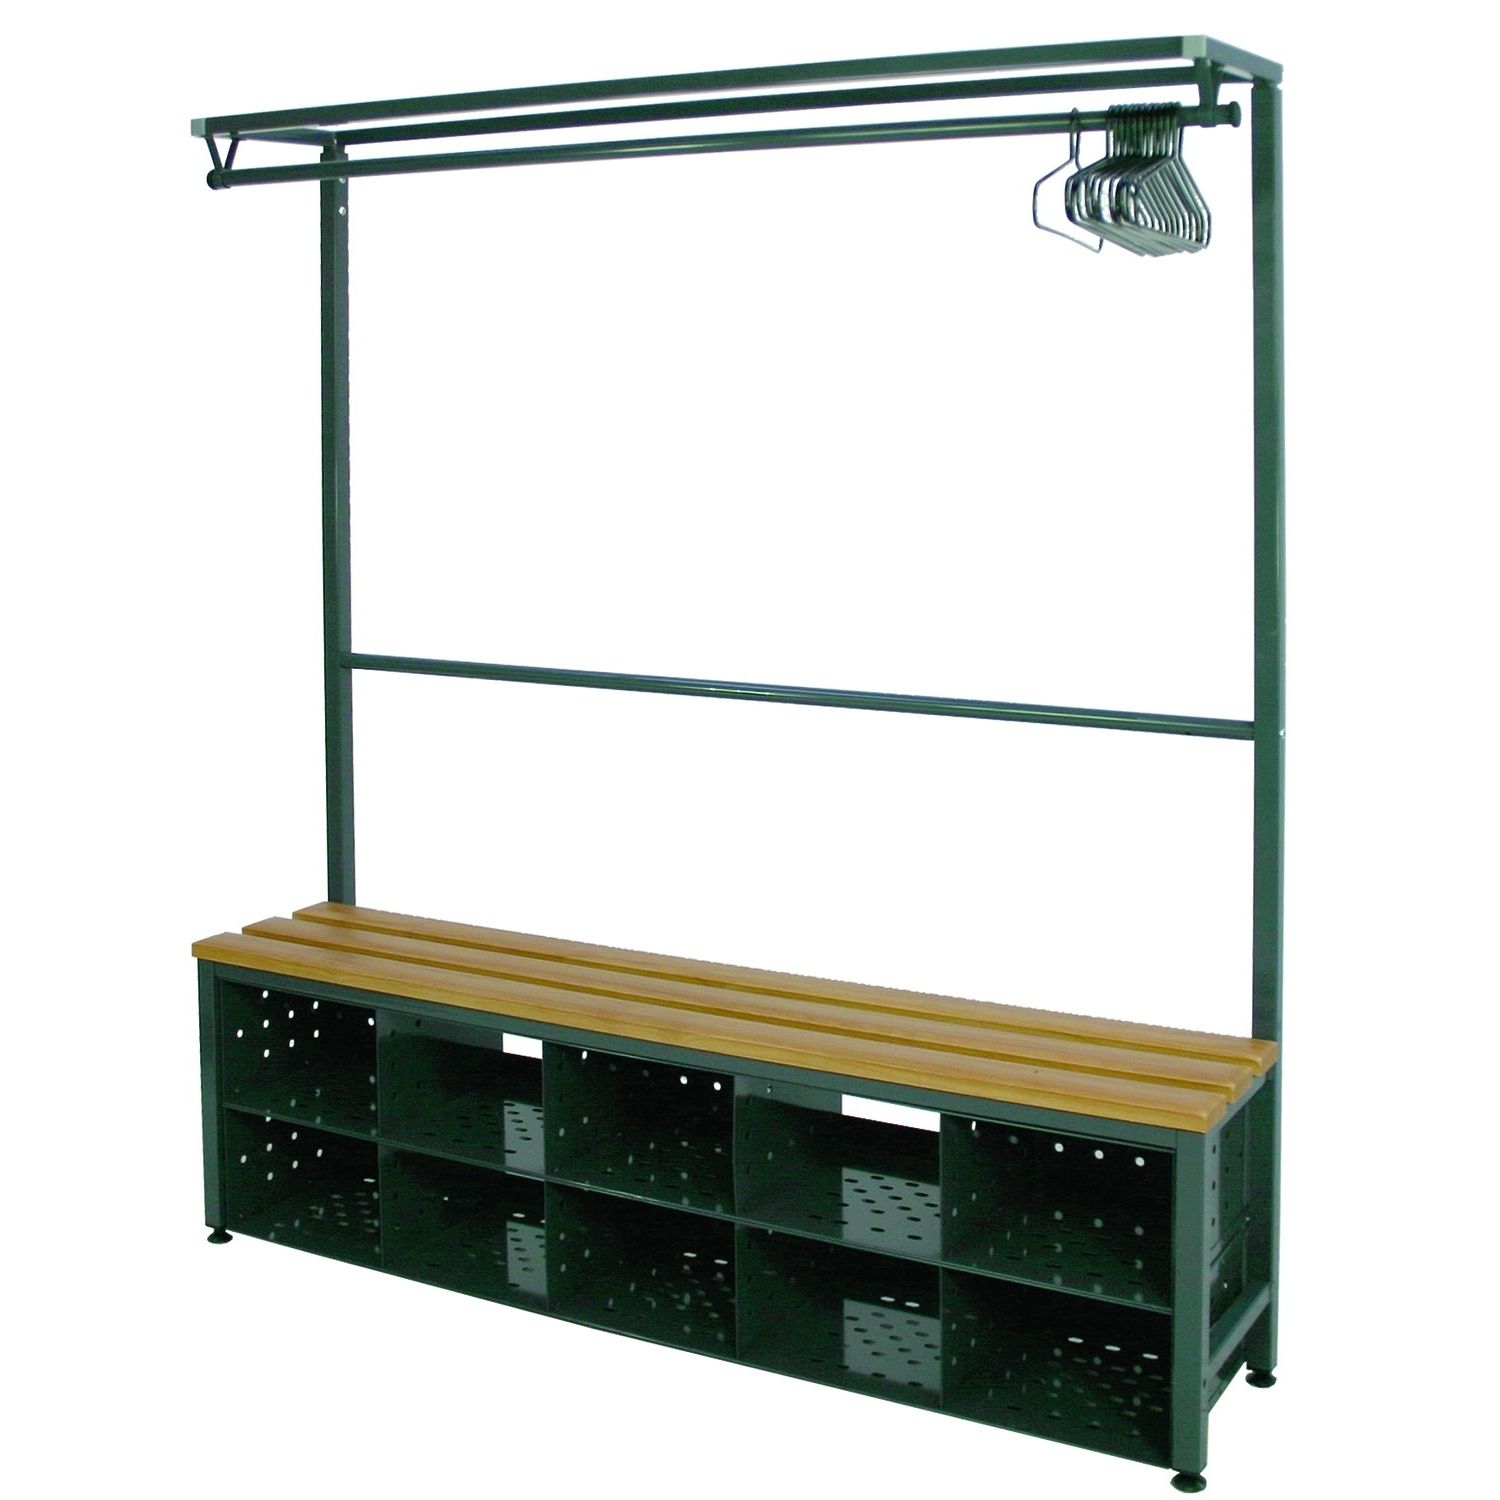 Wardrobes With Double Hanging Rail In Favorite Hanging Rail : The Basic Wardrobe Heavy Duty Steel Clothes Rack (View 15 of 15)